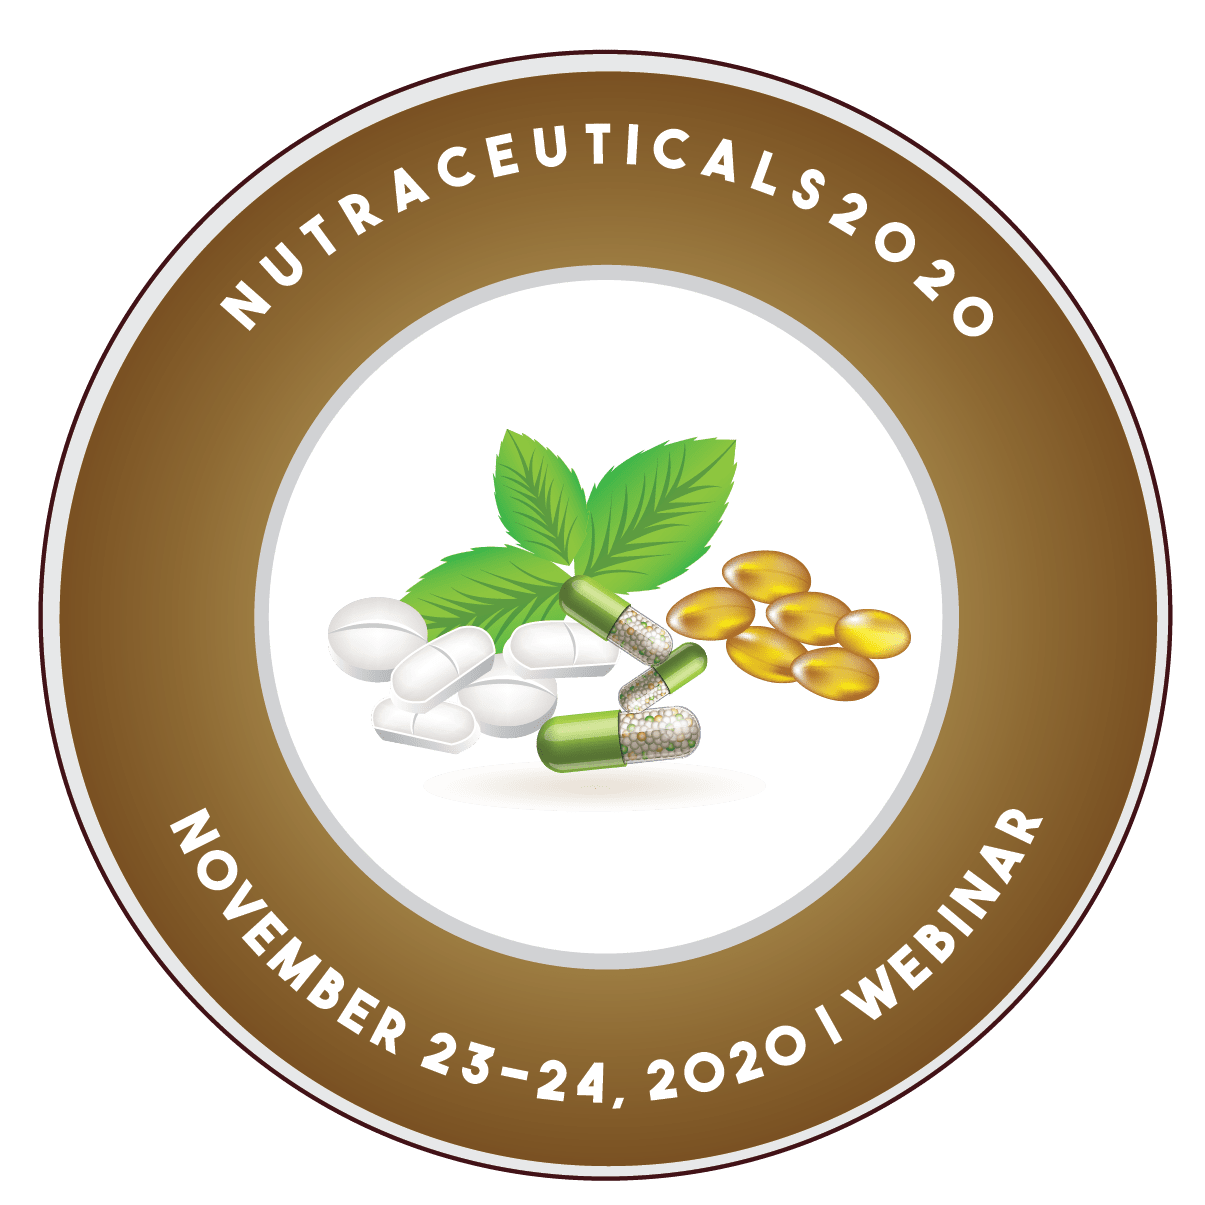 Second World Congress on Advanced Nutraceuticals and Functional Foods